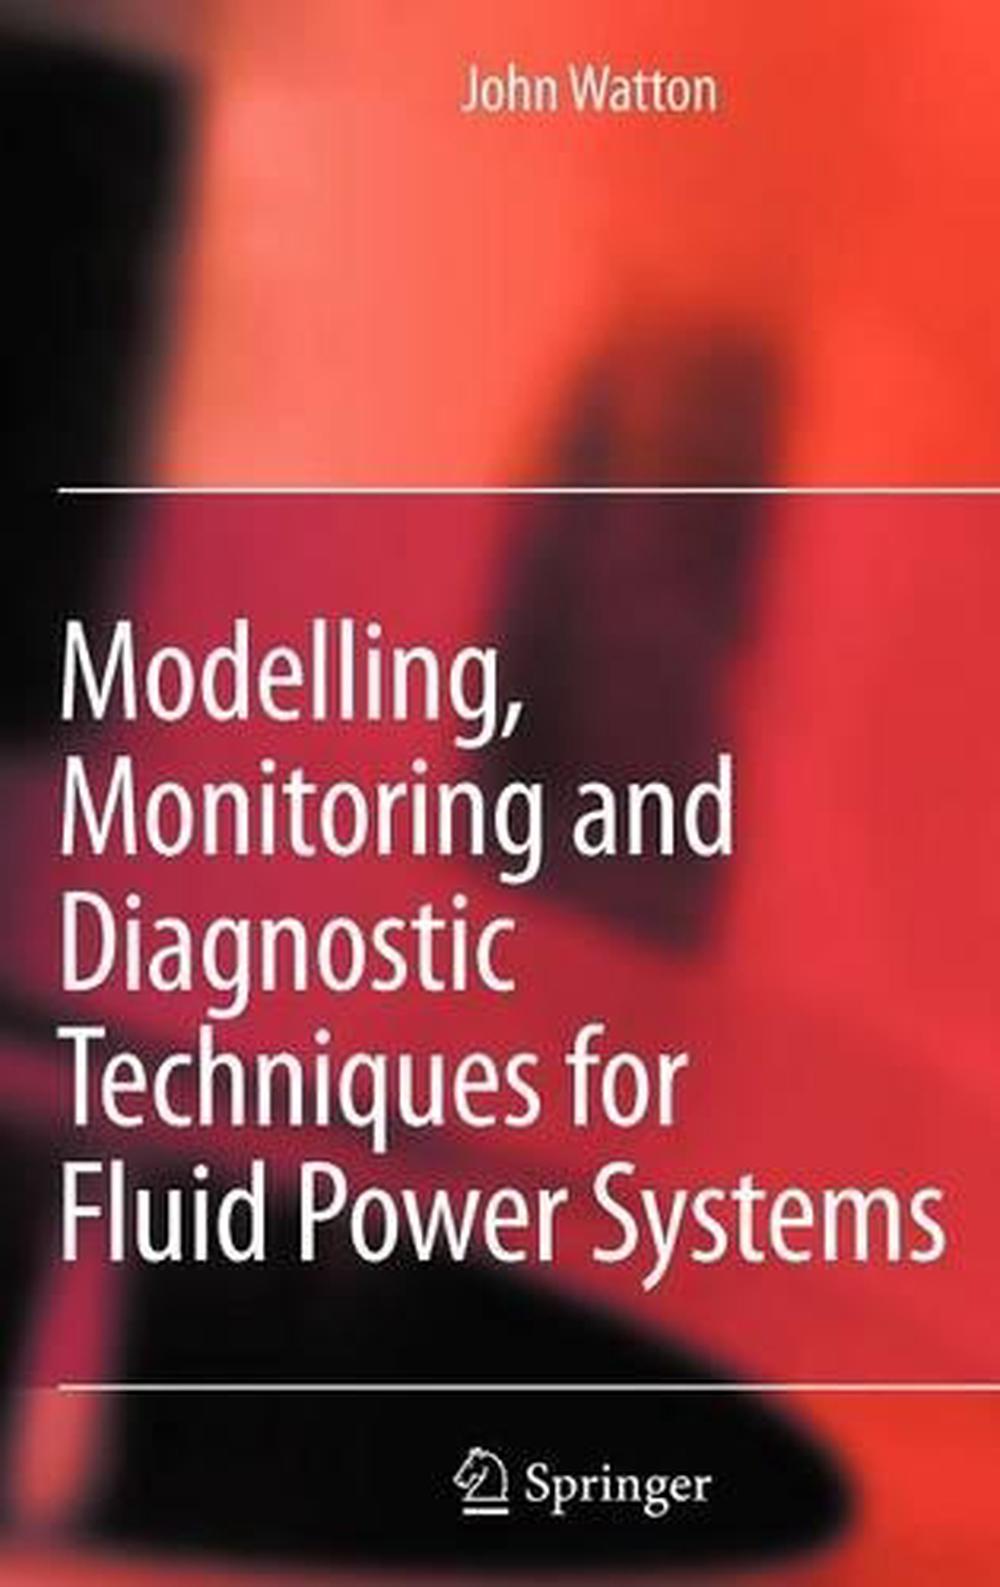 Modelling, Monitoring and Diagnostic Techniques for Fluid Power Systems by John 9781846283734 eBay